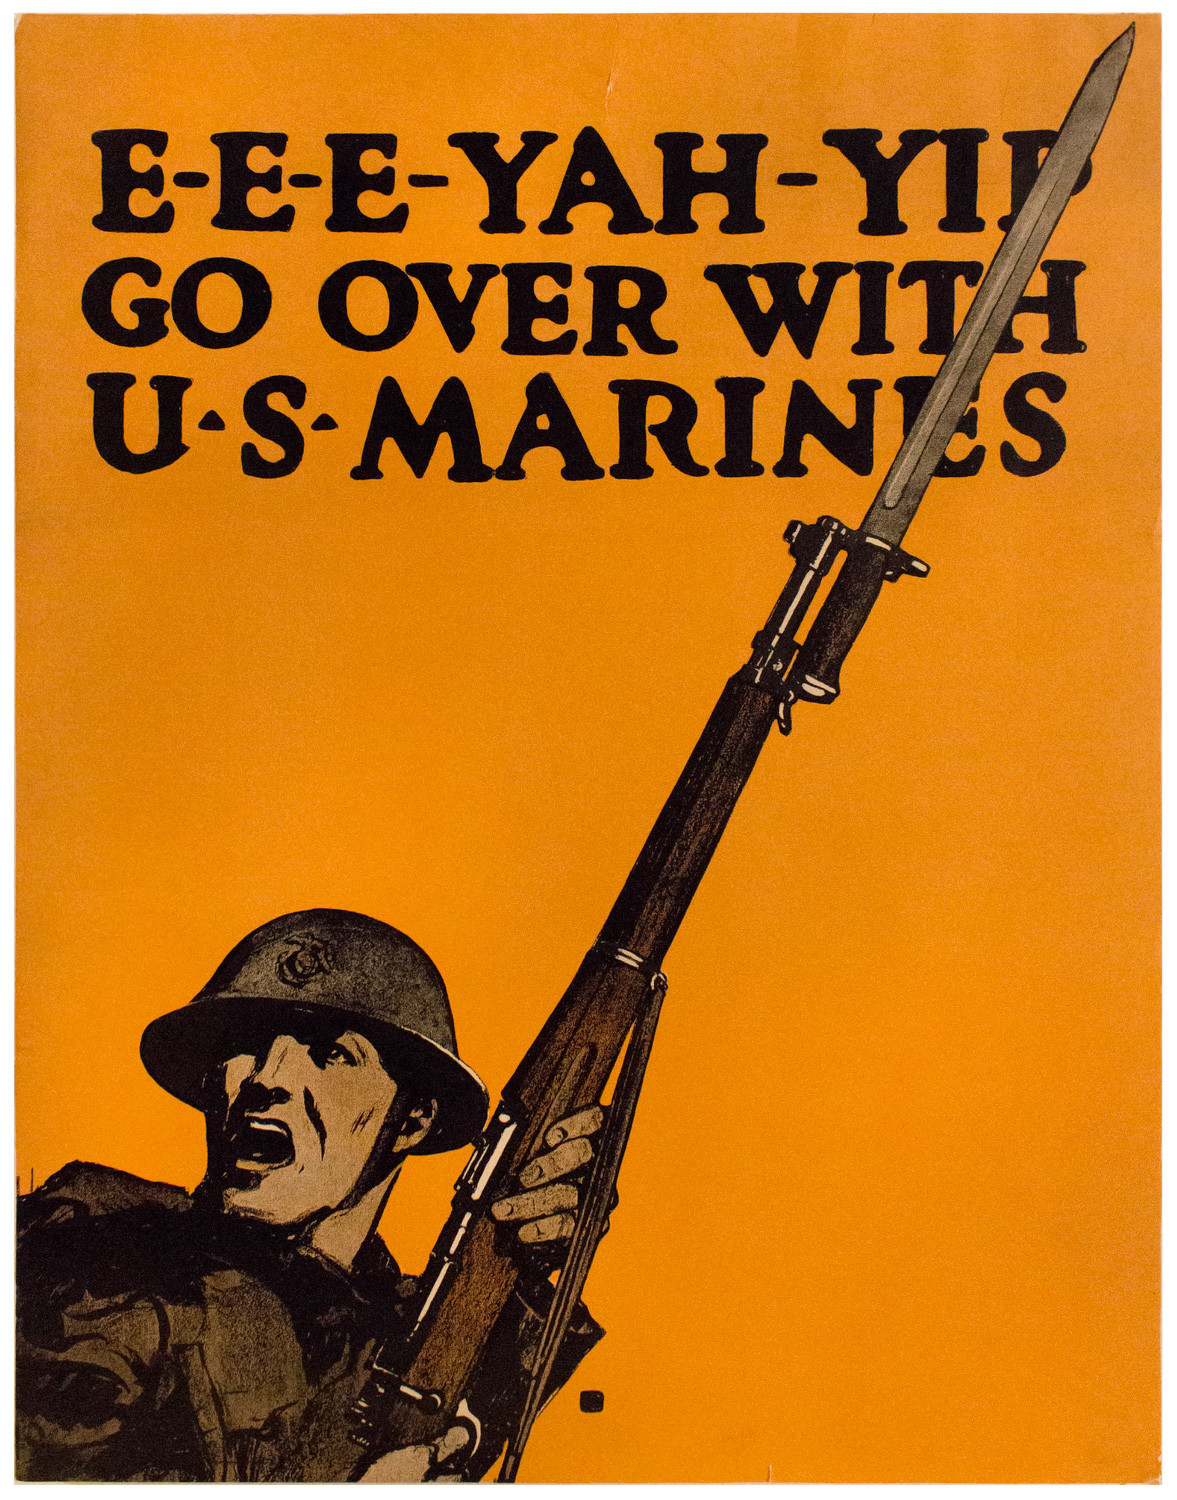 The United States started drafting eligible men between 21 and 30 to the armed forces in May 1917. In order to continue enlistment, Charles Buckles Falls’ poster encouraged Americans there was a need for a draft.